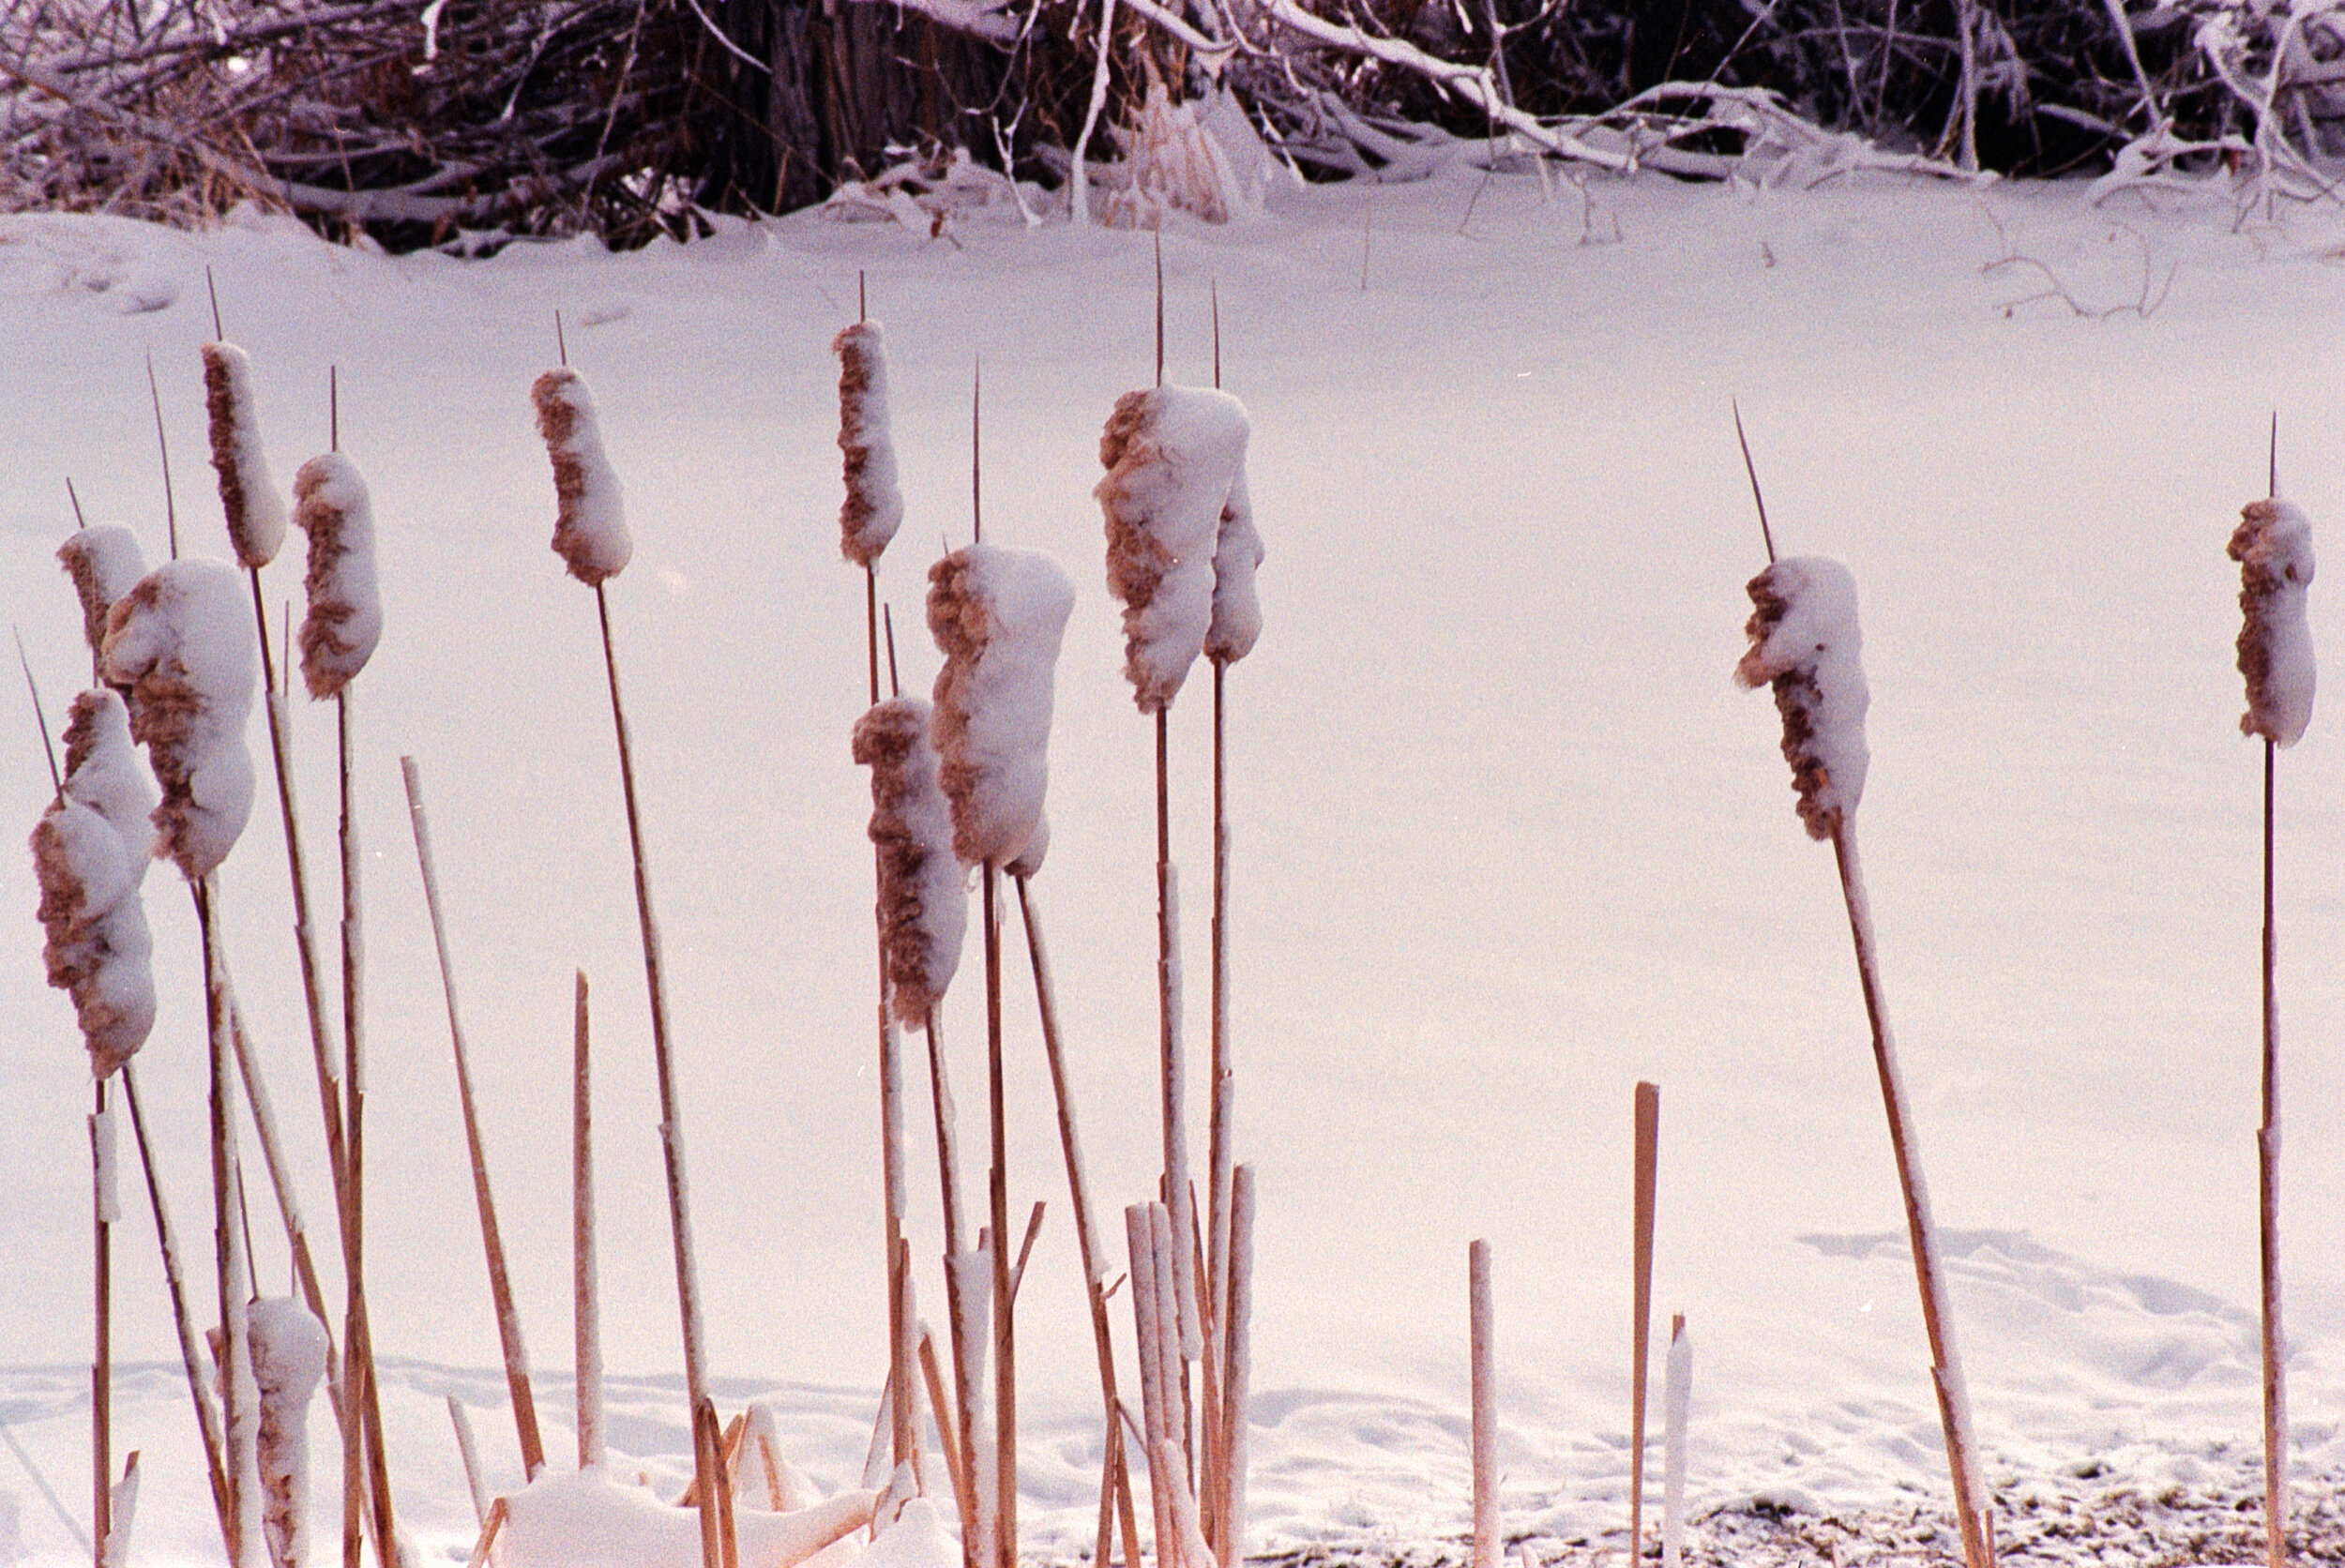 Cattails smothered by snow